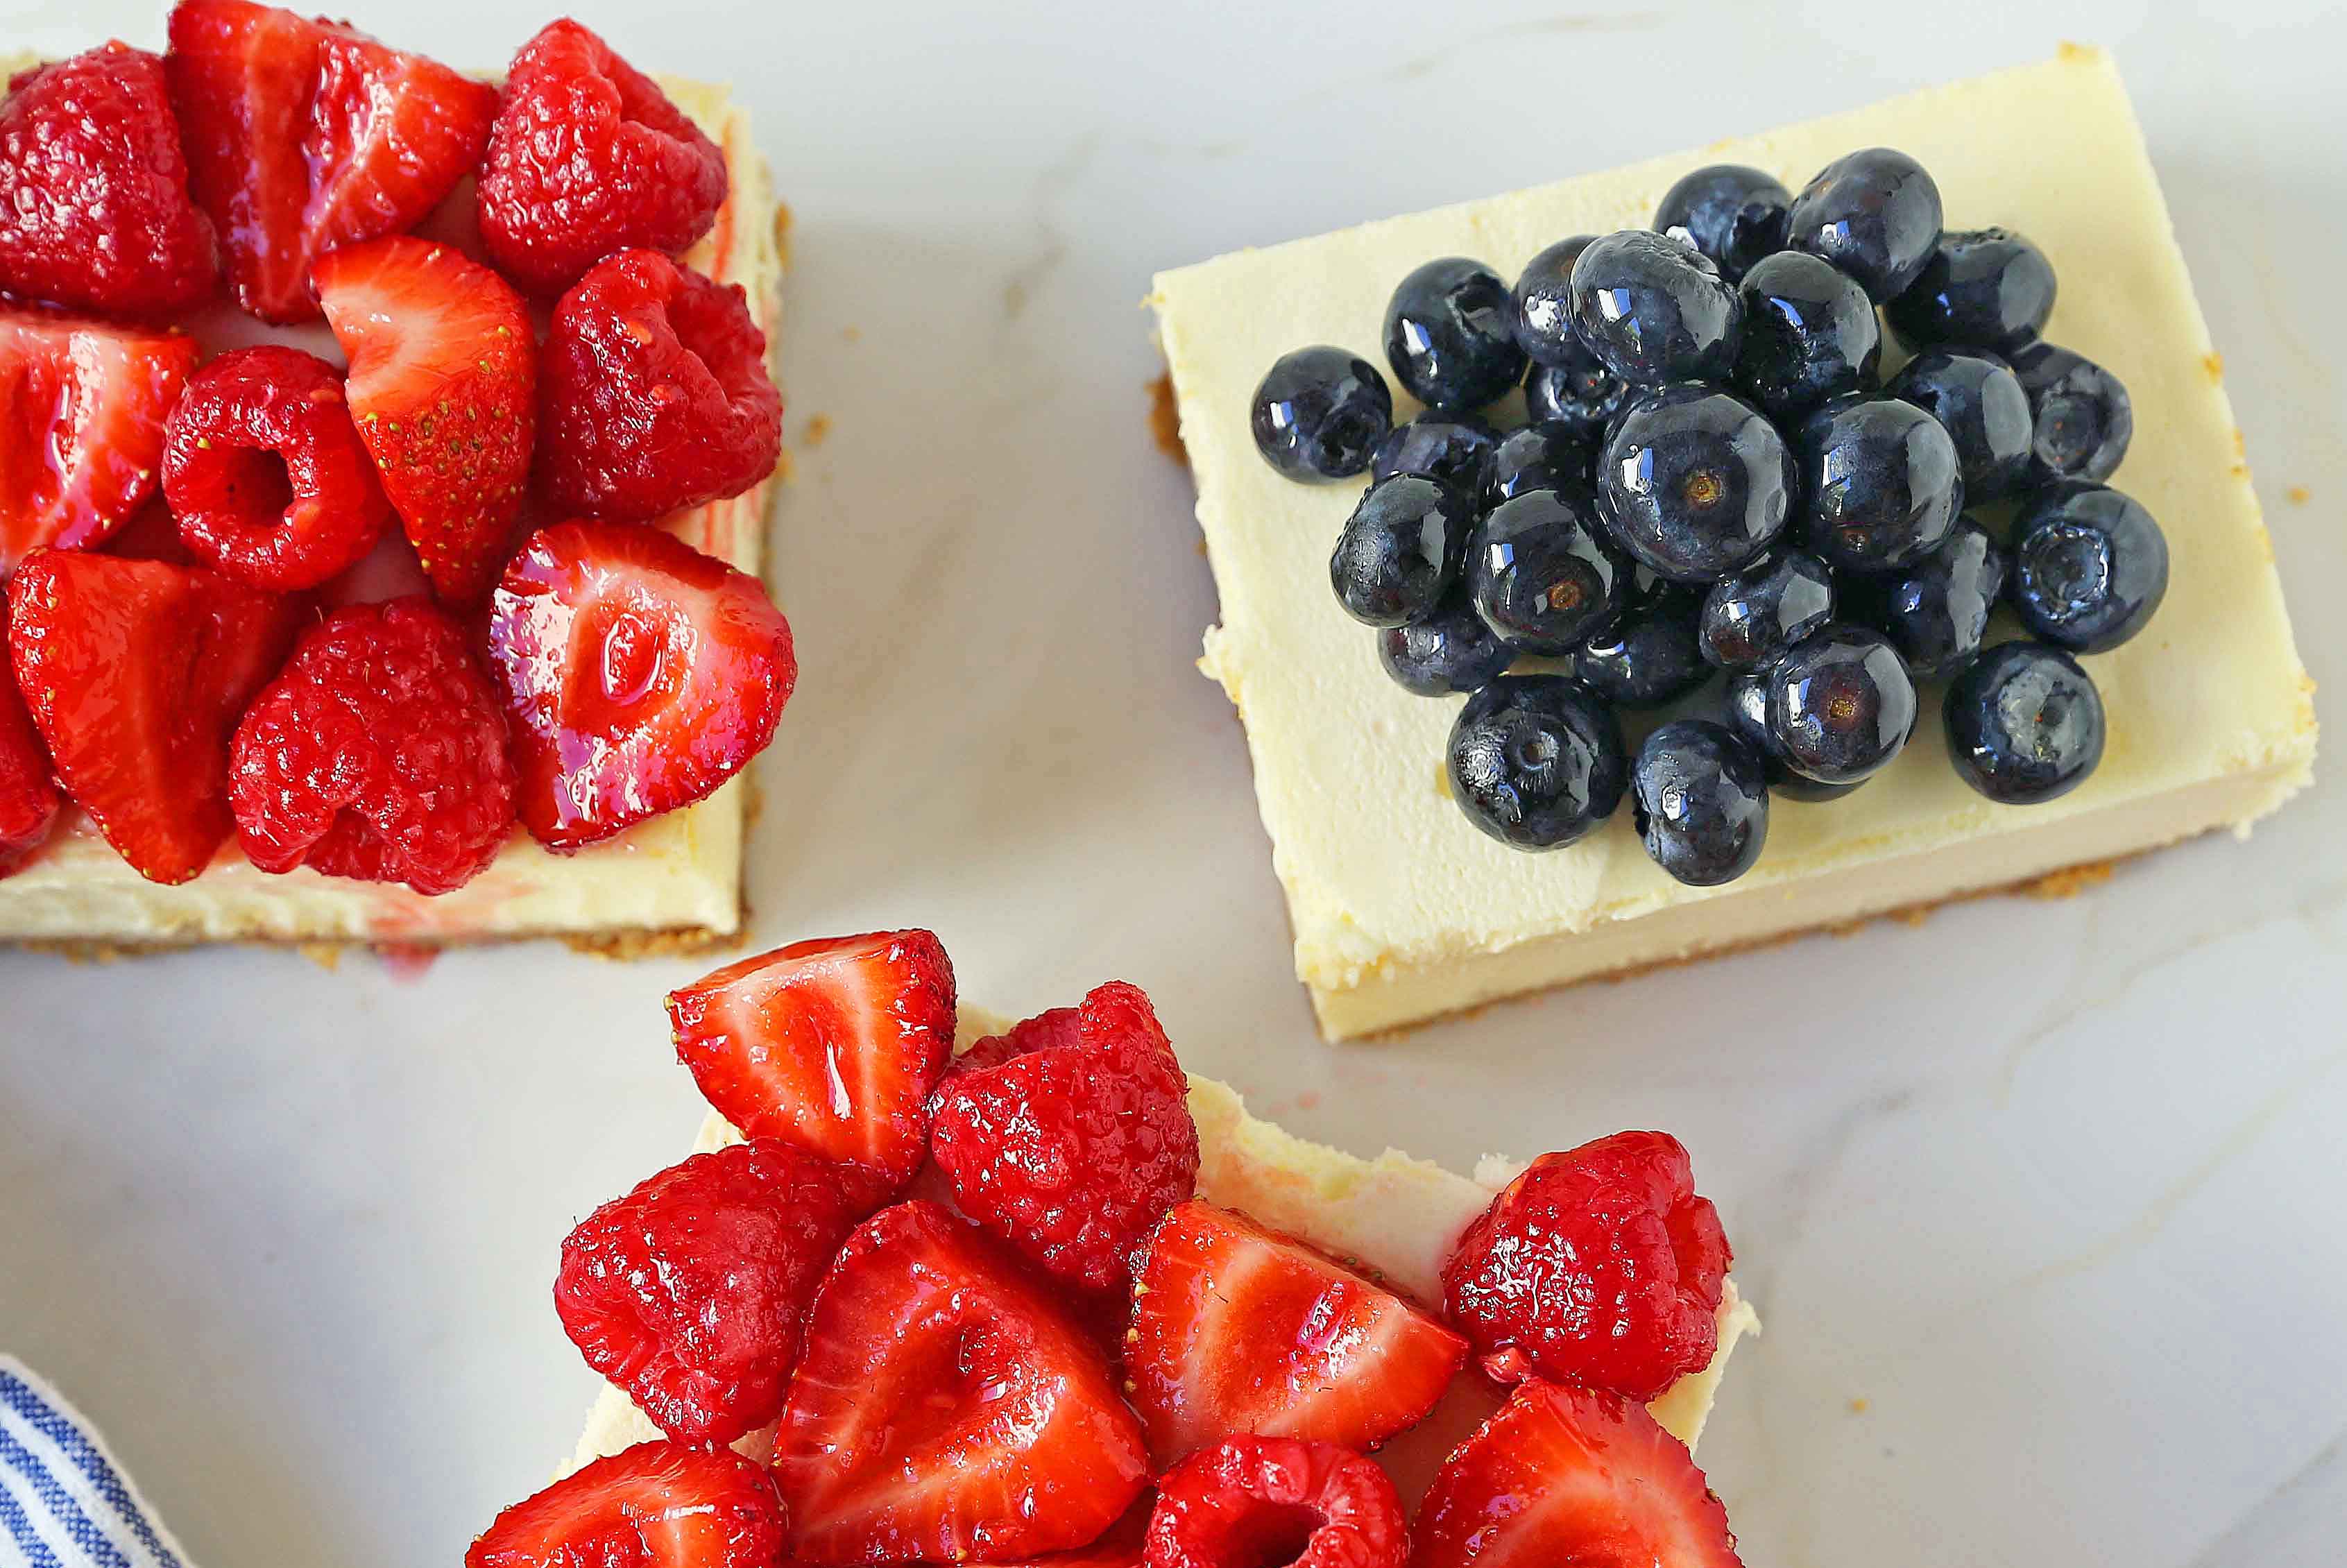 Cheesecake Bars with Driscoll's Berries. Creamy cheesecake bars with buttery graham cracker crust. The perfect cheesecake square! www.modernhoney.com #cheesecake #cheesecakebars #cheesecakesquares